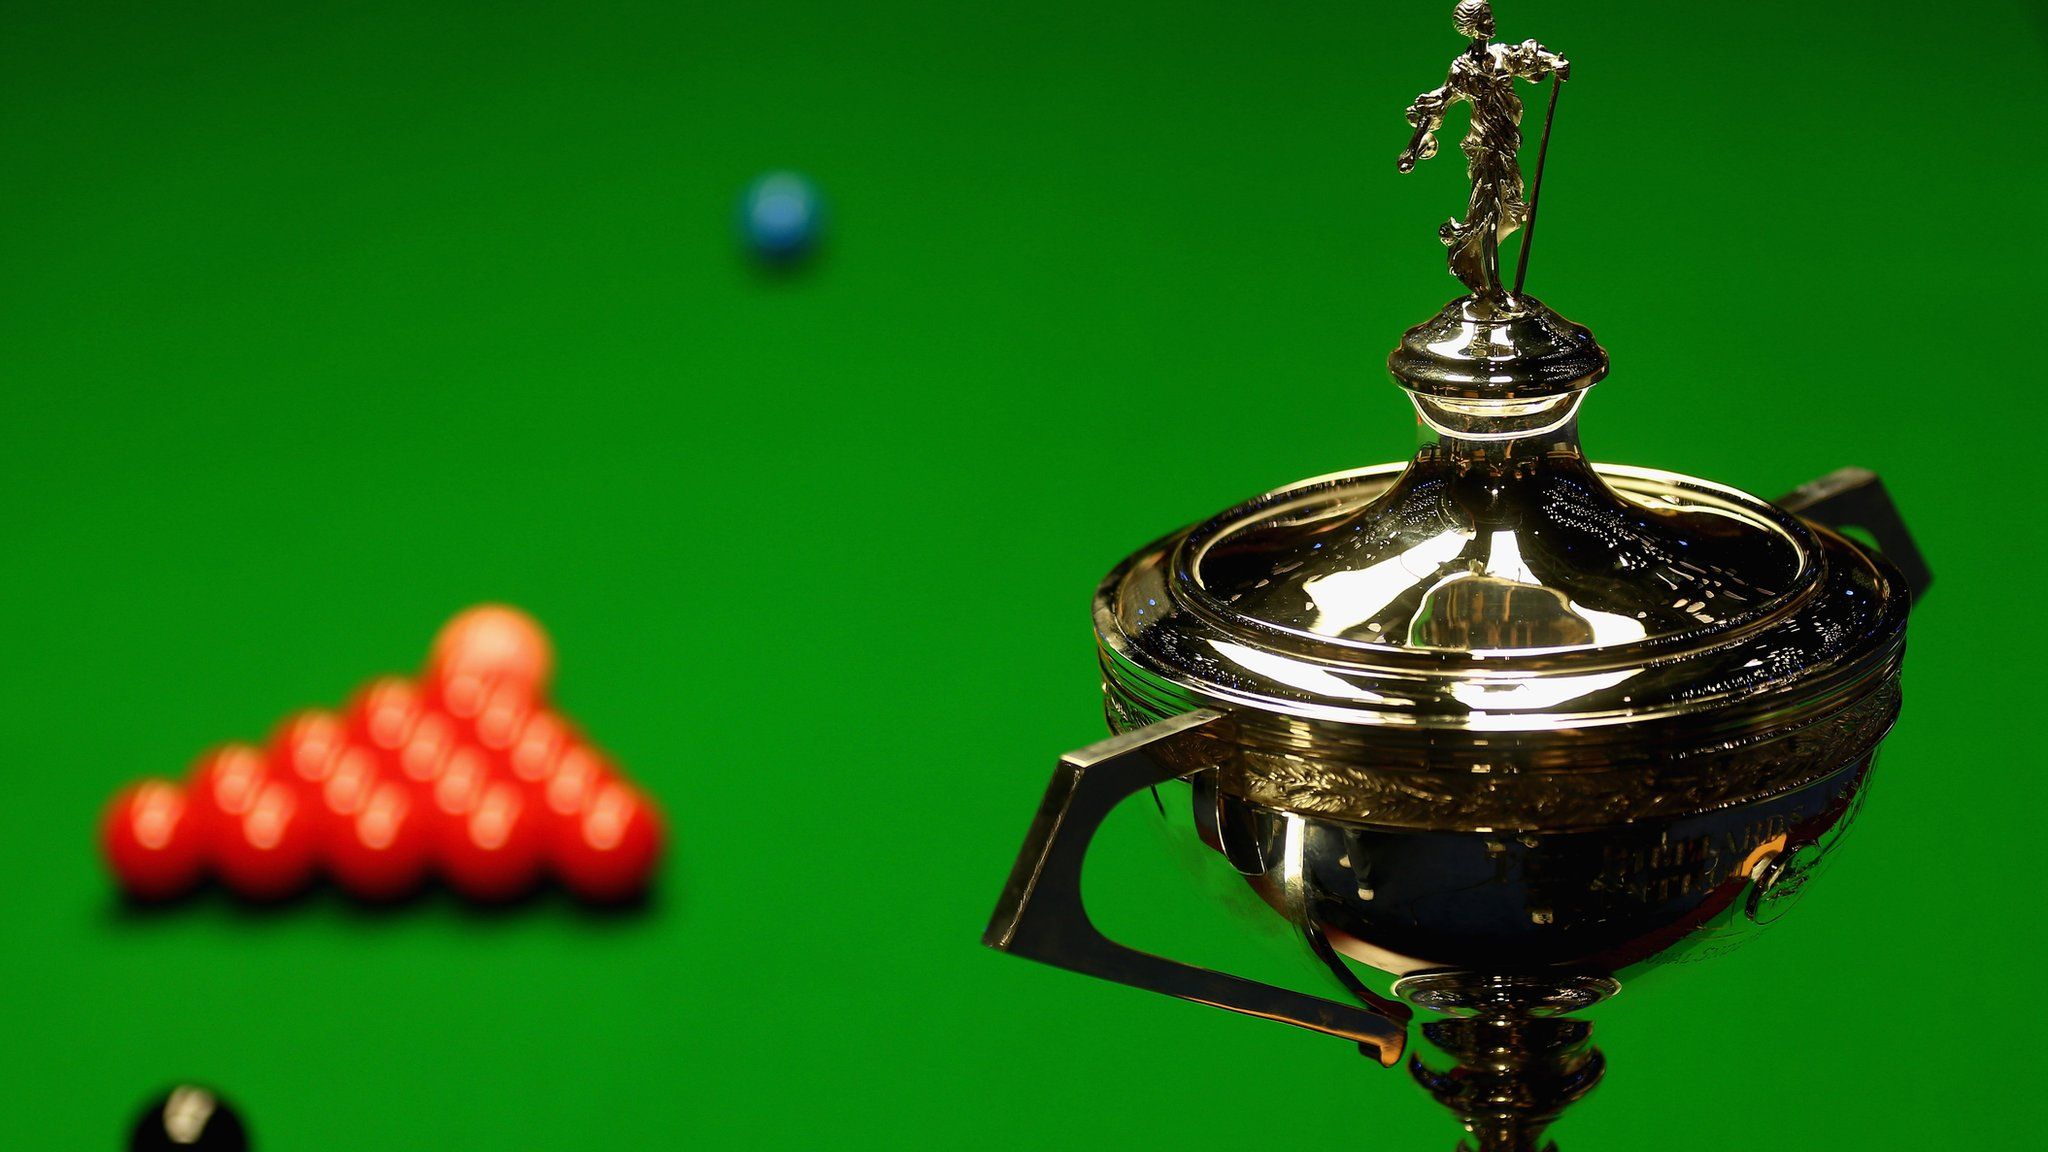 The Snooker World Championship trophy